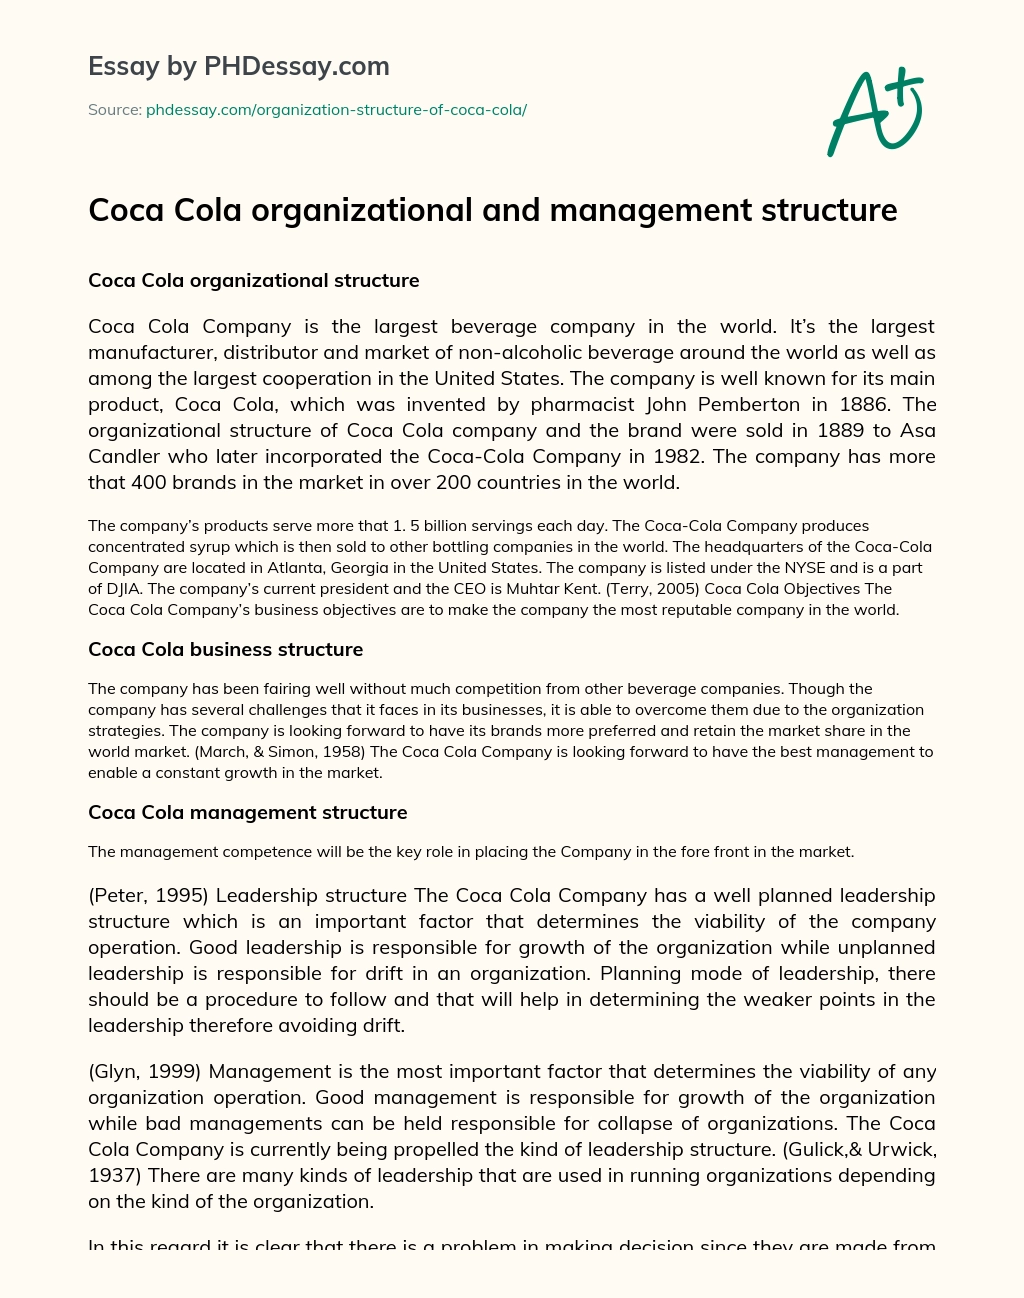 Coca Cola organizational and management structure essay